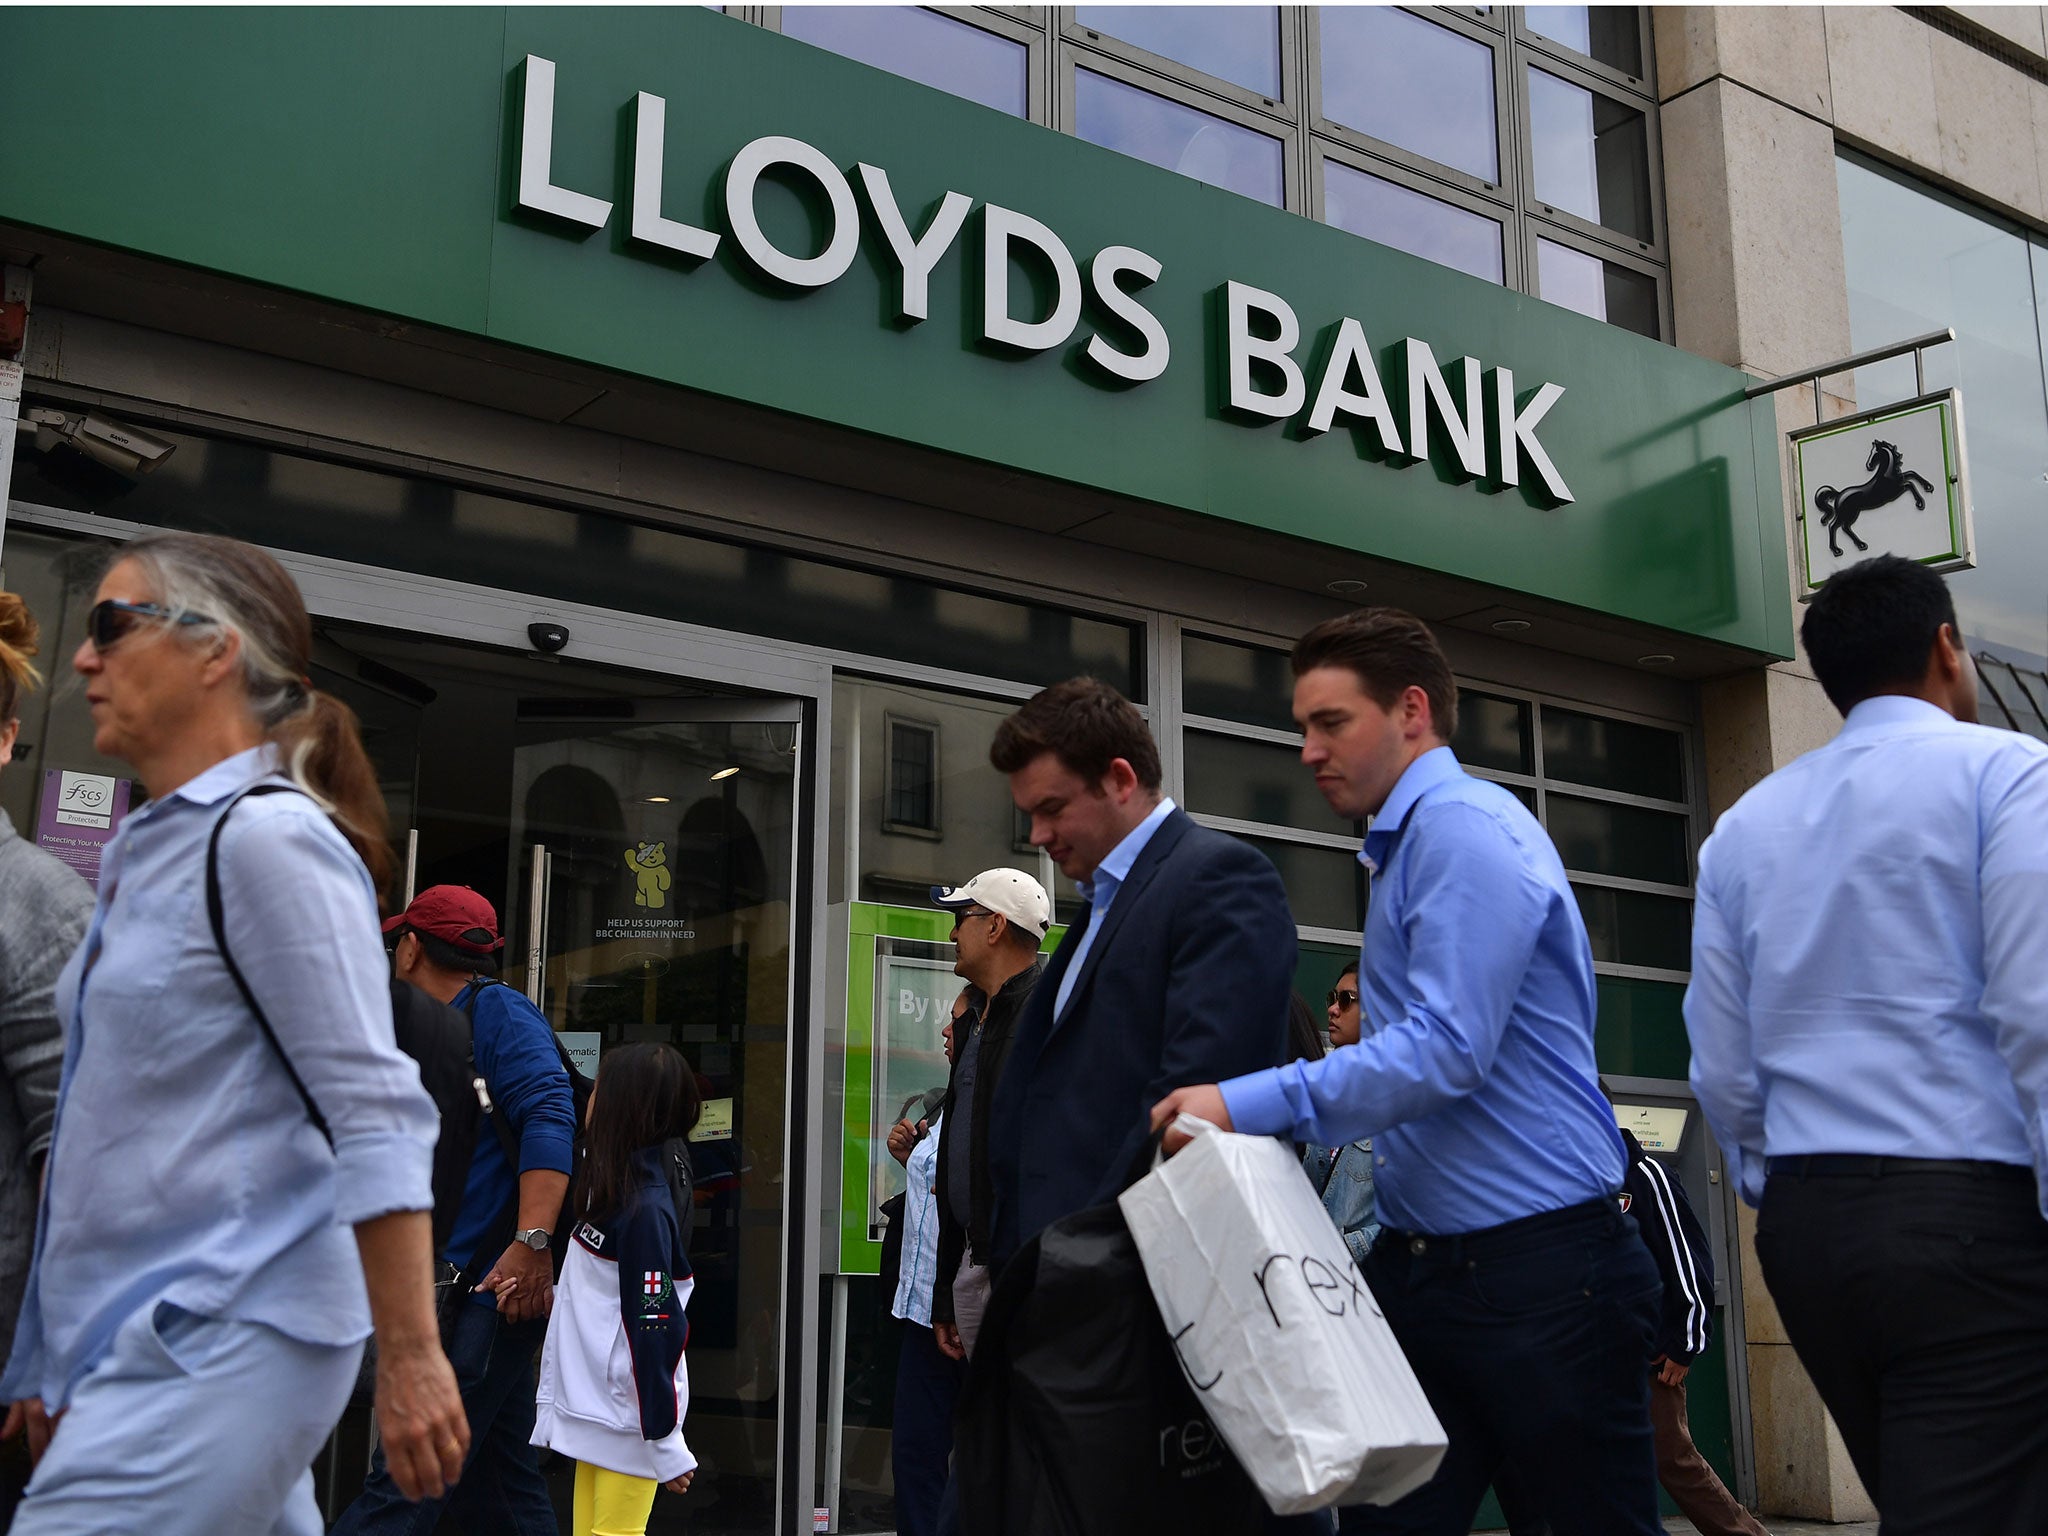 Lloyds is now close to recovery after reporting profits had doubled in the first quarter of the year